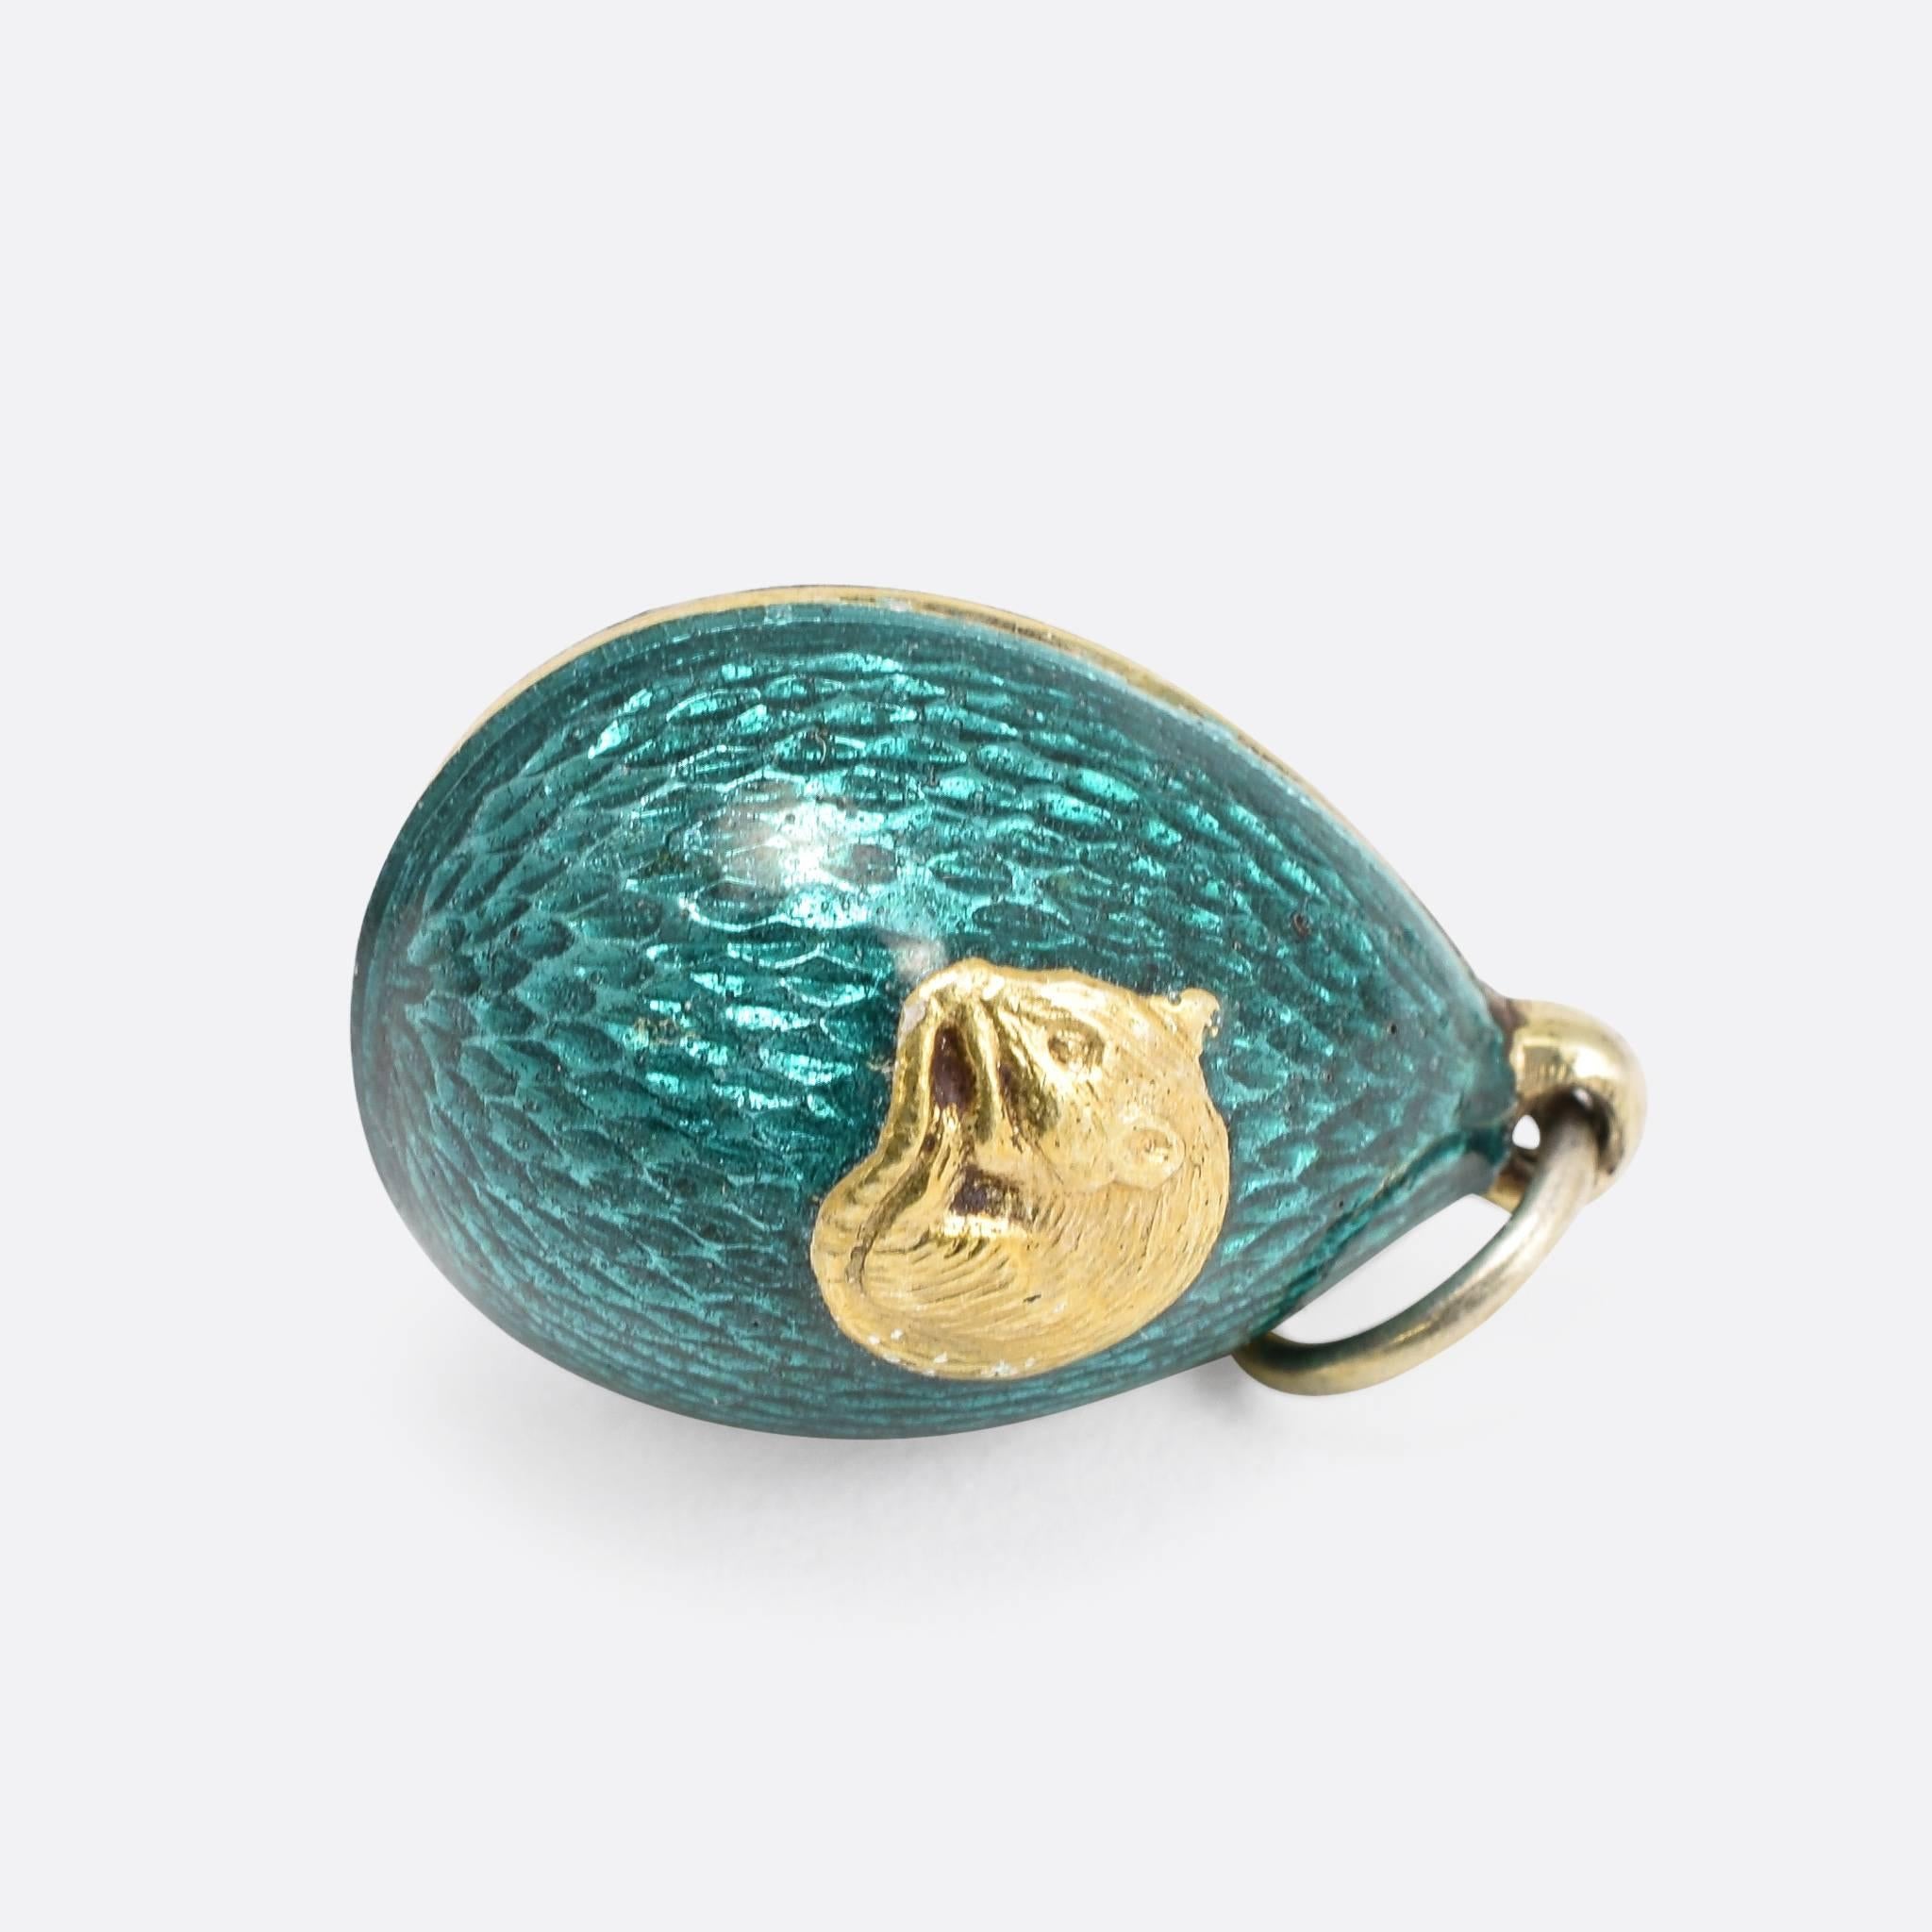 This cute antique miniature egg pendant dates to the early 20th Century. It's finished in gorgeous dark turquoise enamel, and features at the front a sleeping rat. The piece is modelled in 88 zolotnik silver, a higher purity than the usual 84z - the